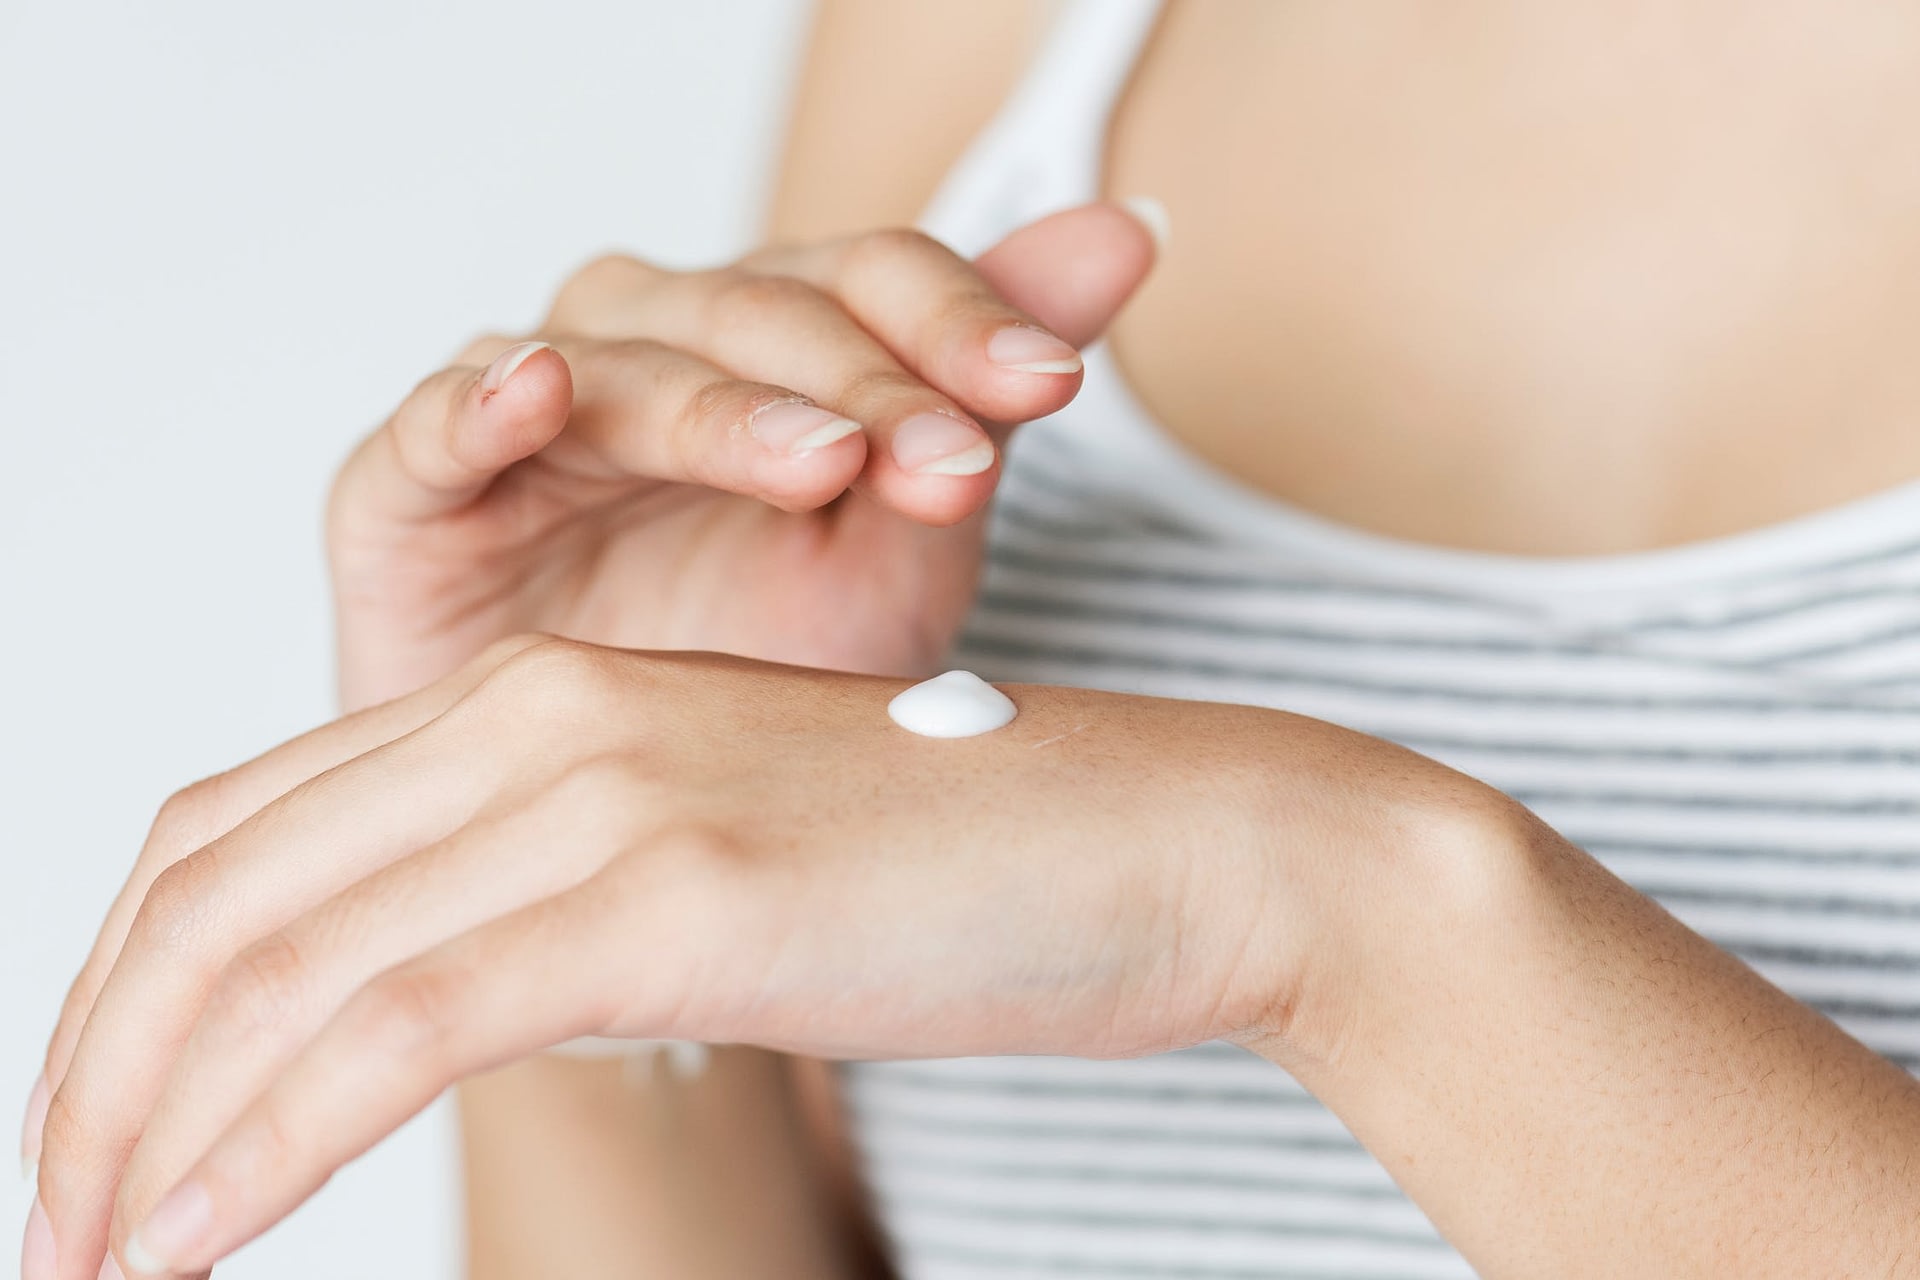 a woman using hand lotion to moisturize